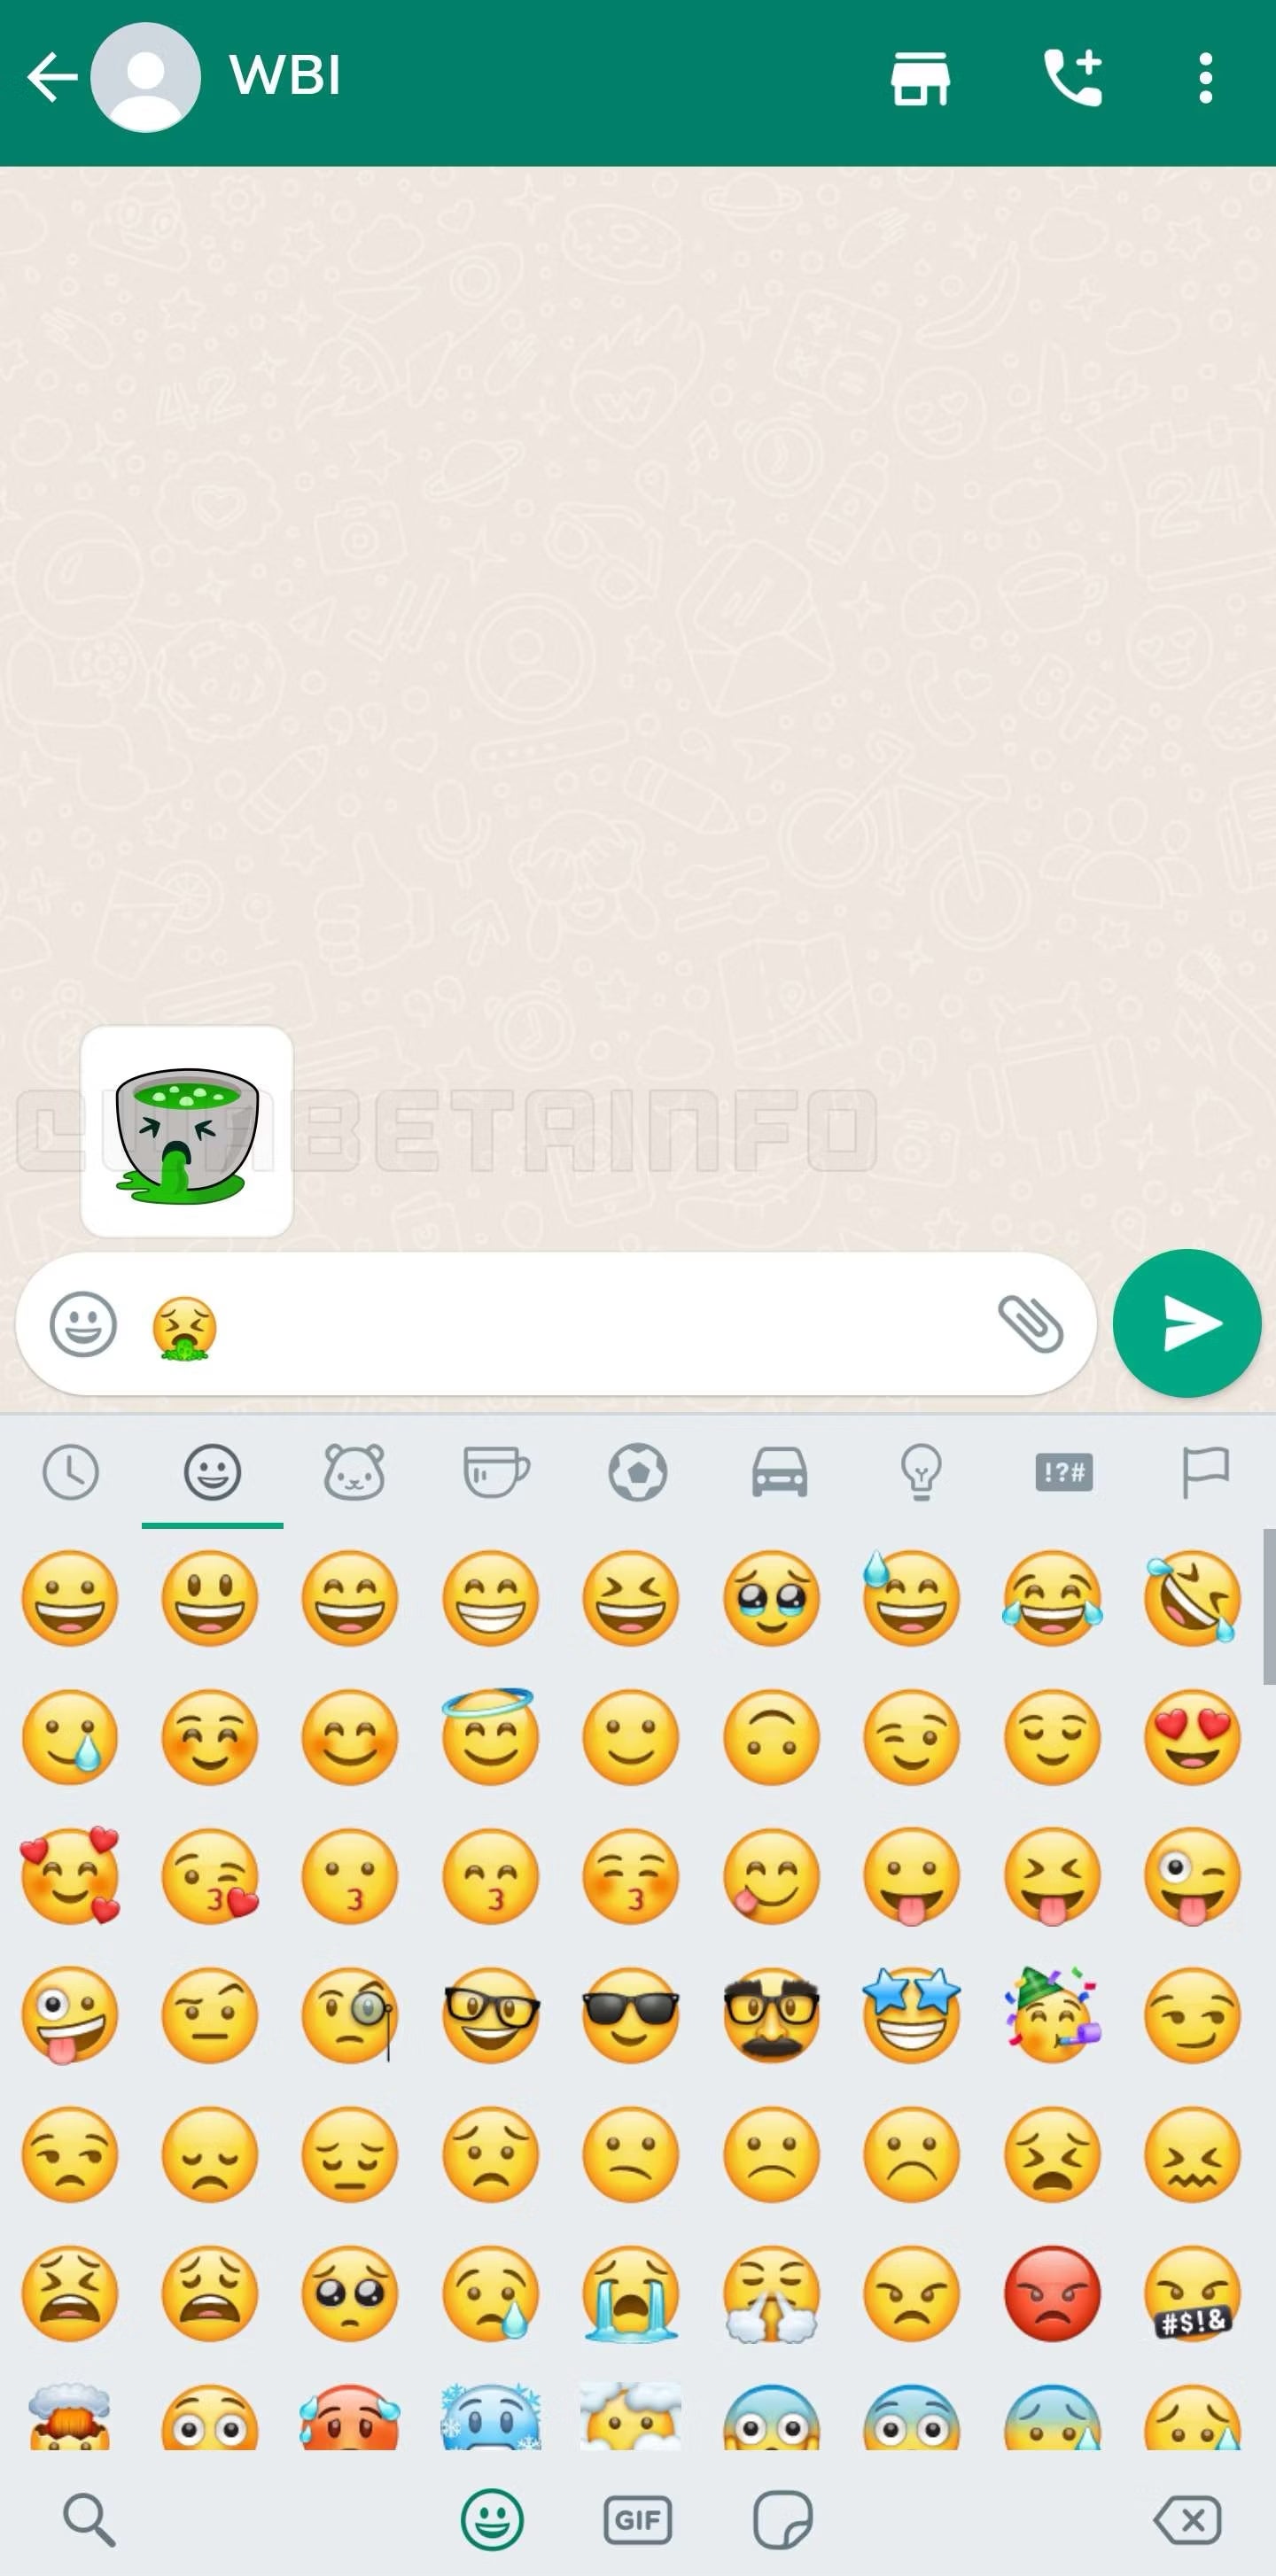 So you mean to tell me that the new WhatsApp Beta can save me some time when sticker-searching?